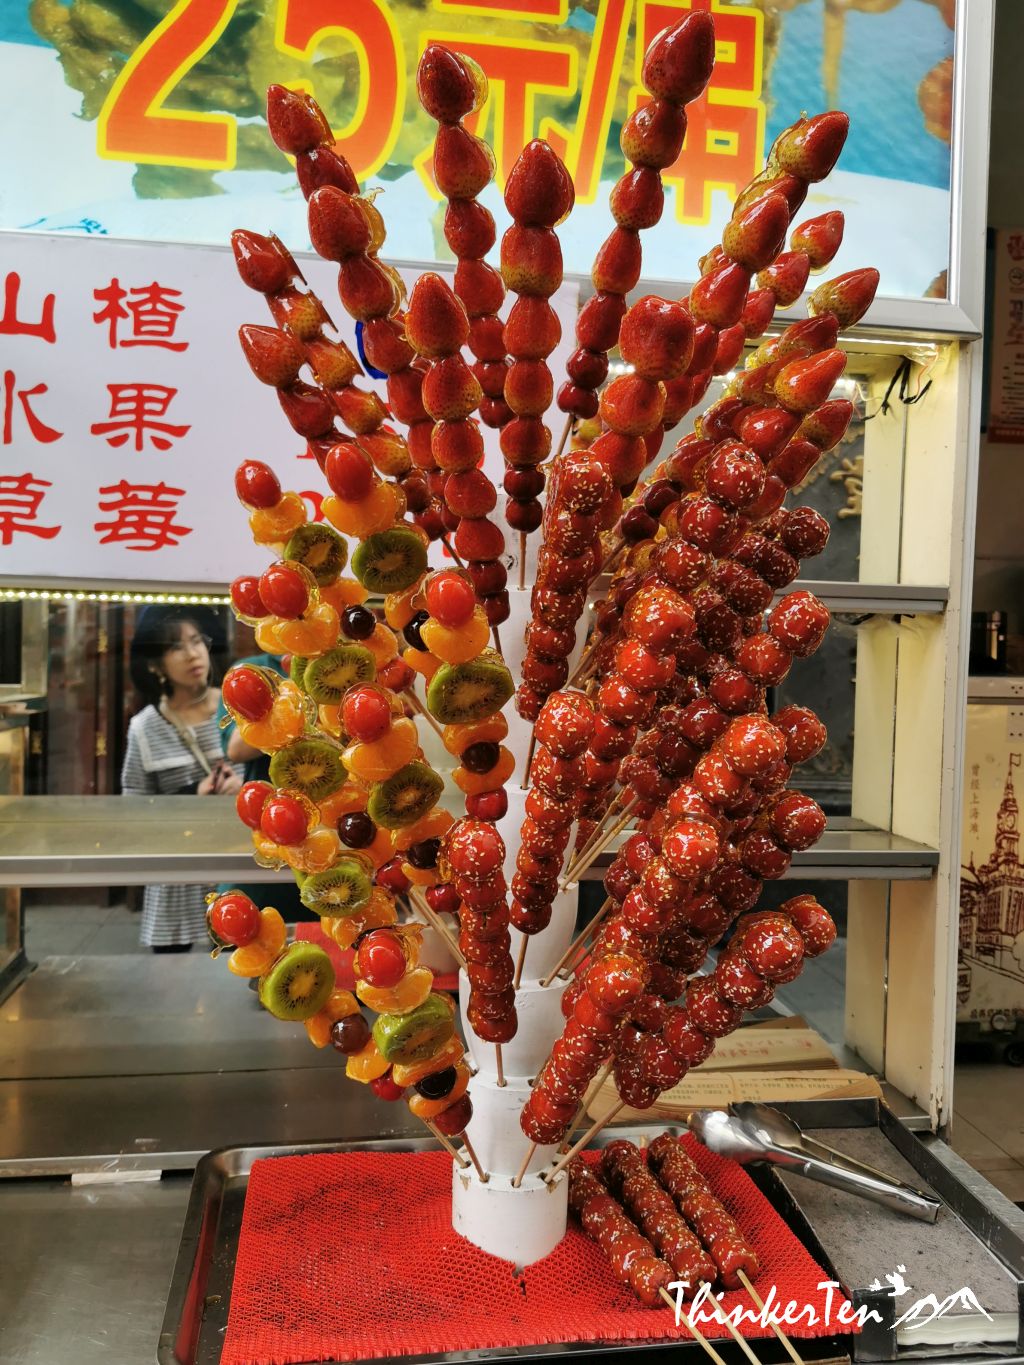 Top Snacks to eat in Cheng Huang Miao Shanghai 上海城隍庙